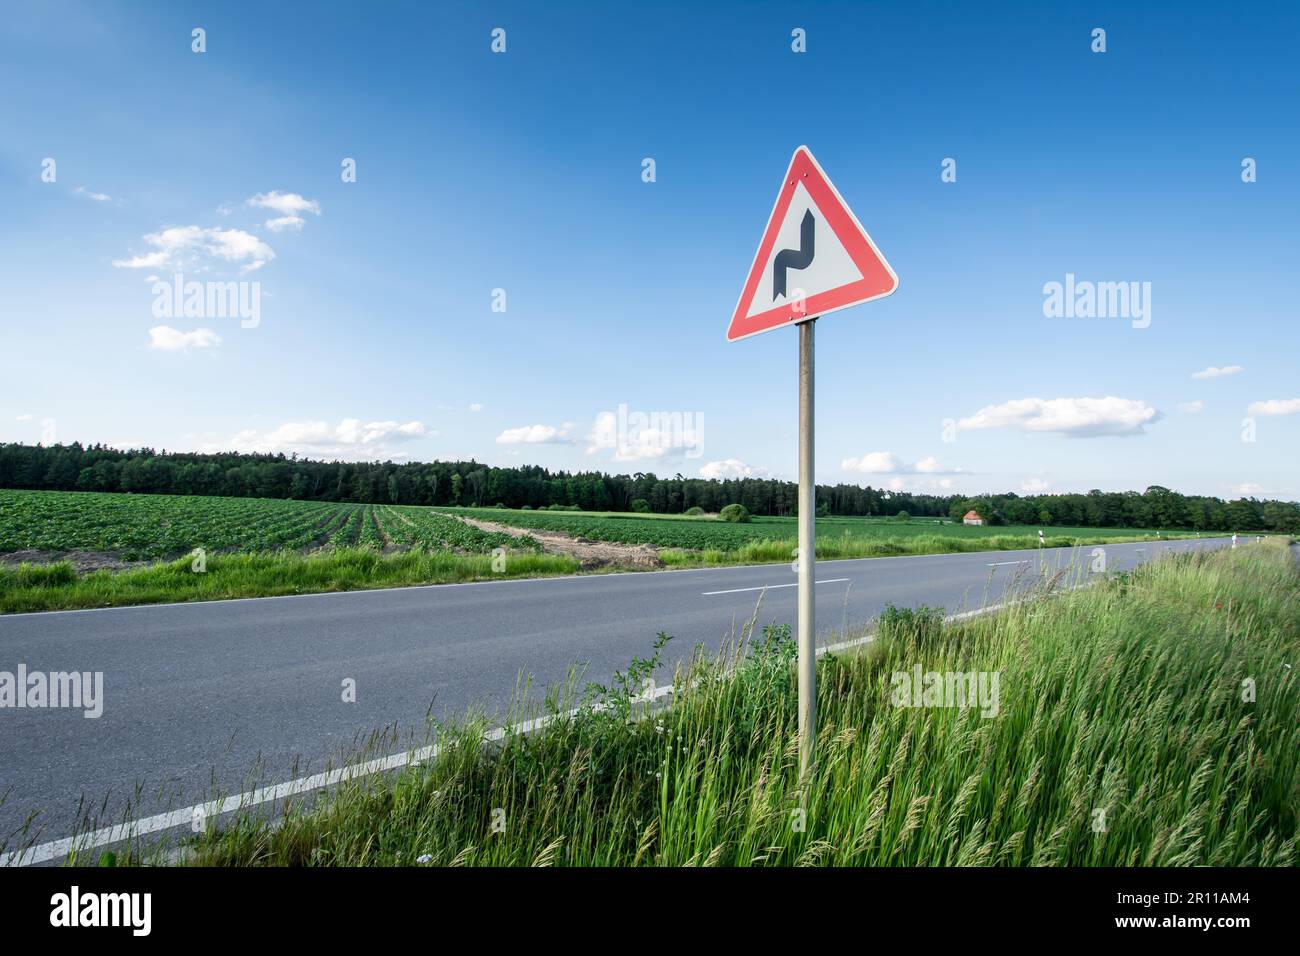 Traffic sign warning for a winding road Stock Photo